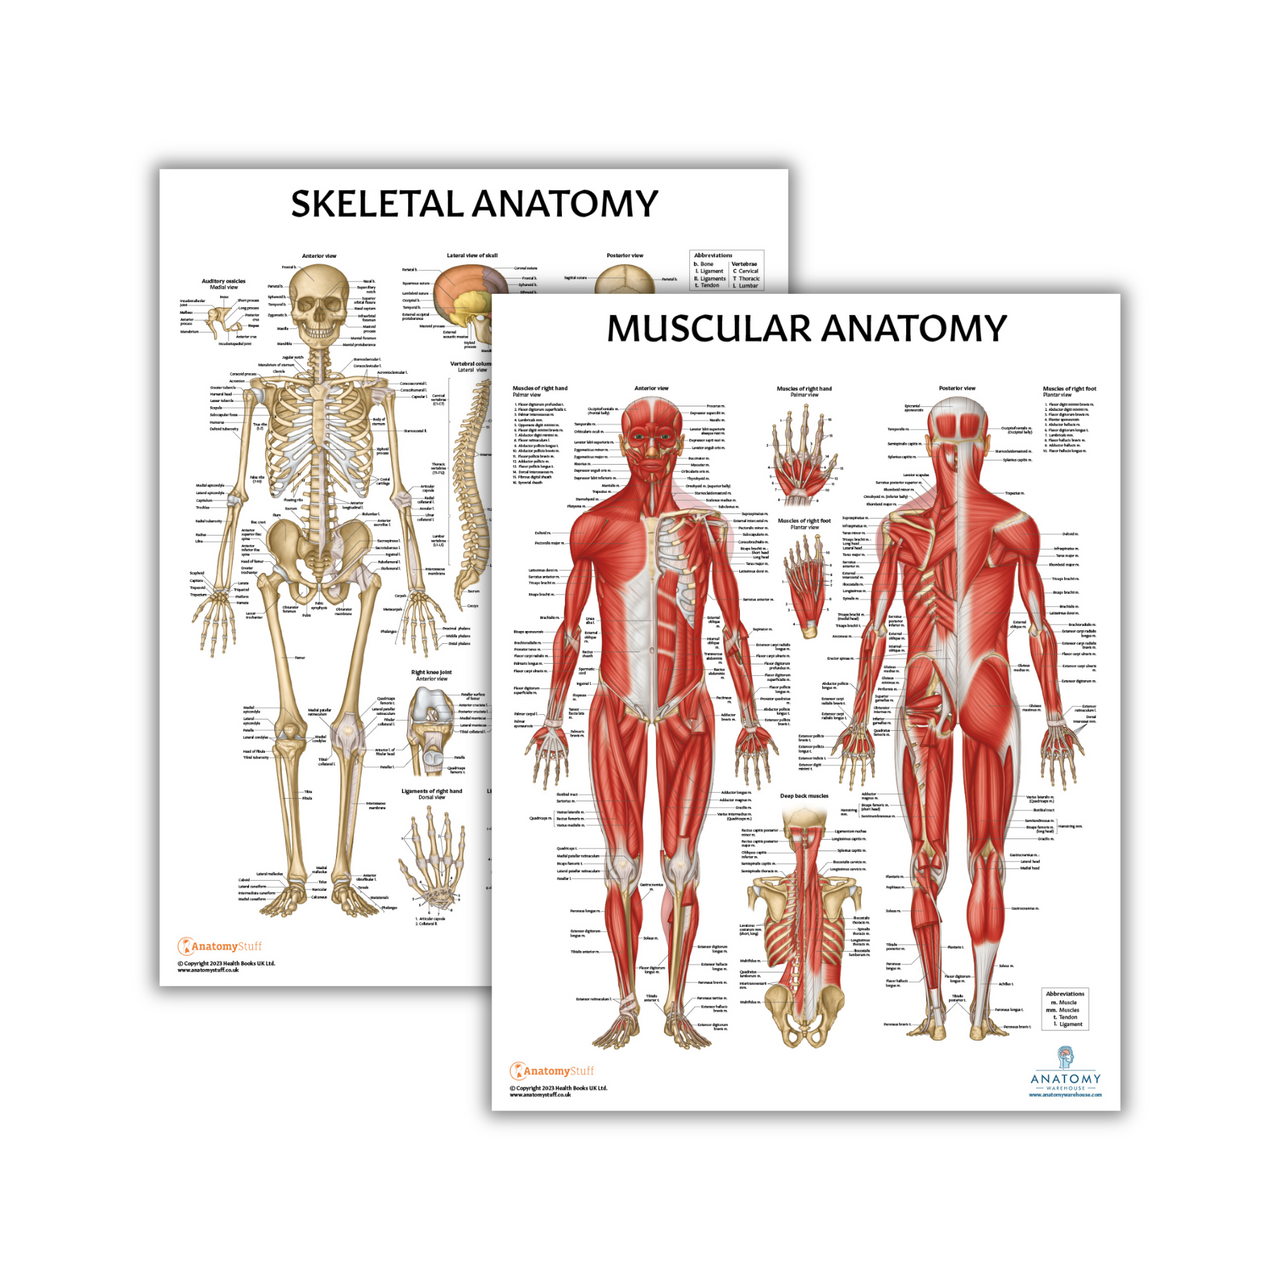 Anatomy Lab - The Skeletal and Muscular System Laminated Poster Set